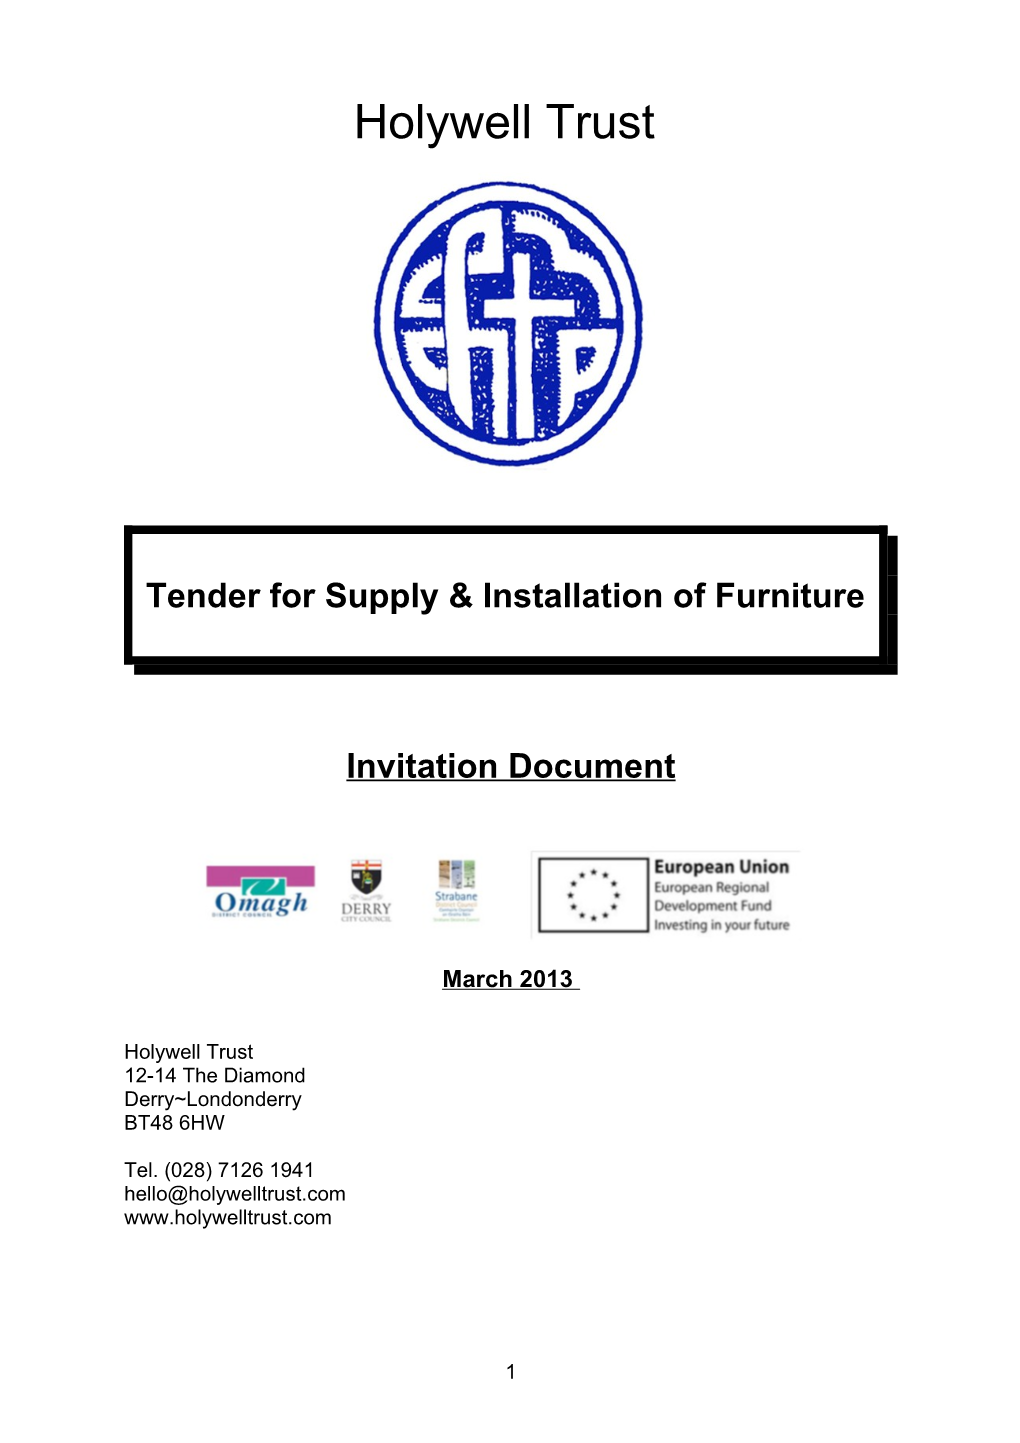 Tender for Supply & Installation of Furniture